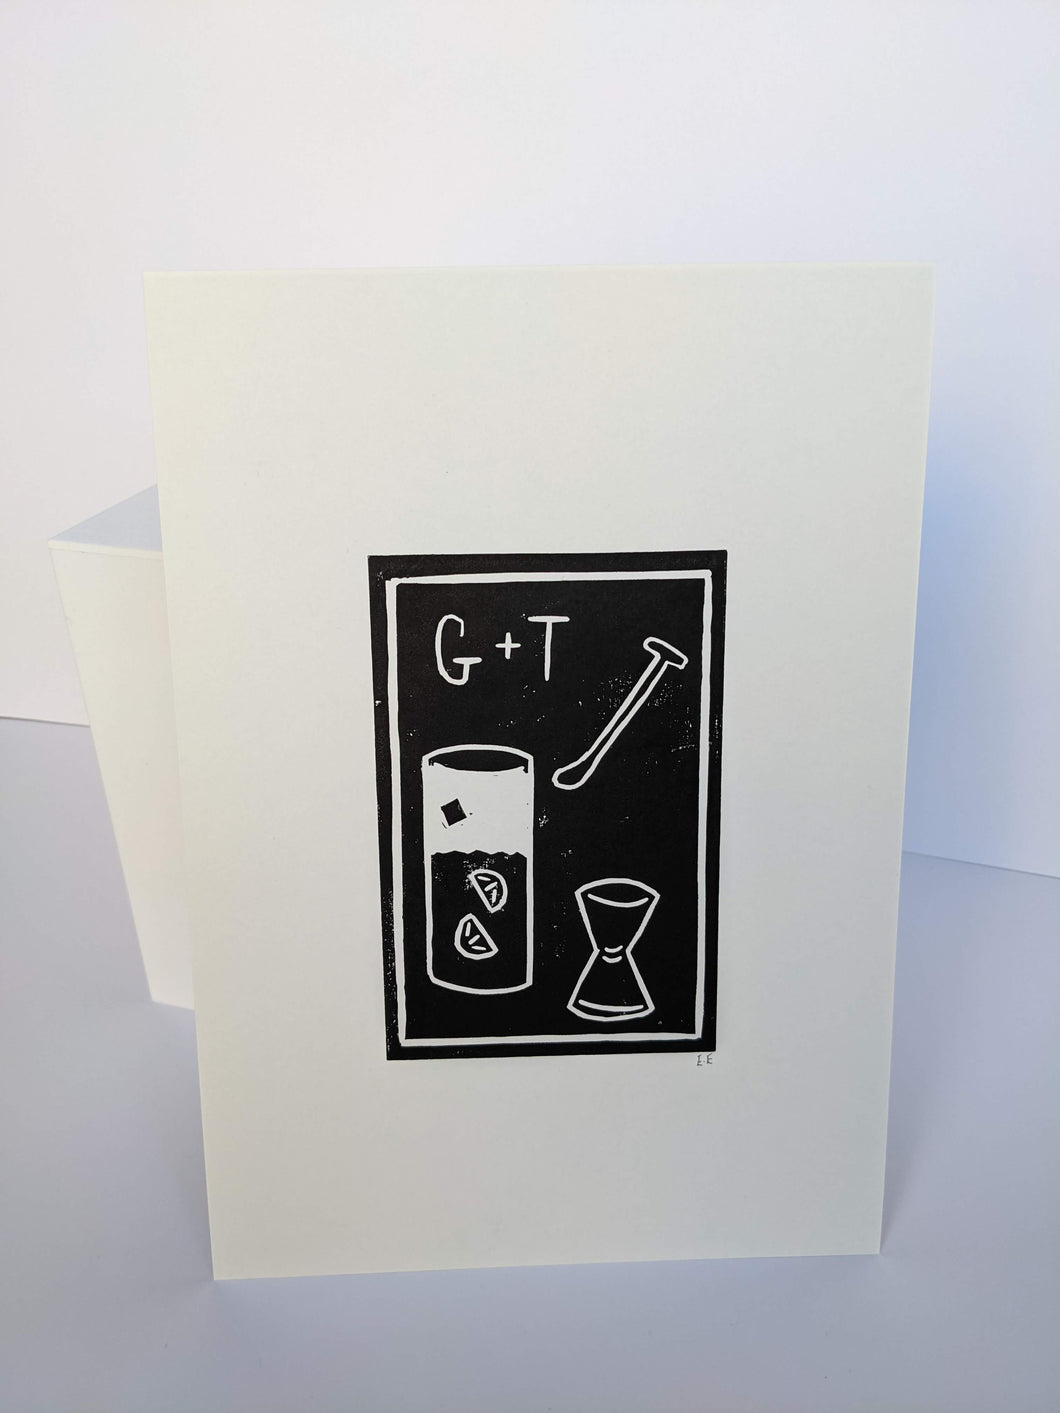 A gin and tonic print on a white background